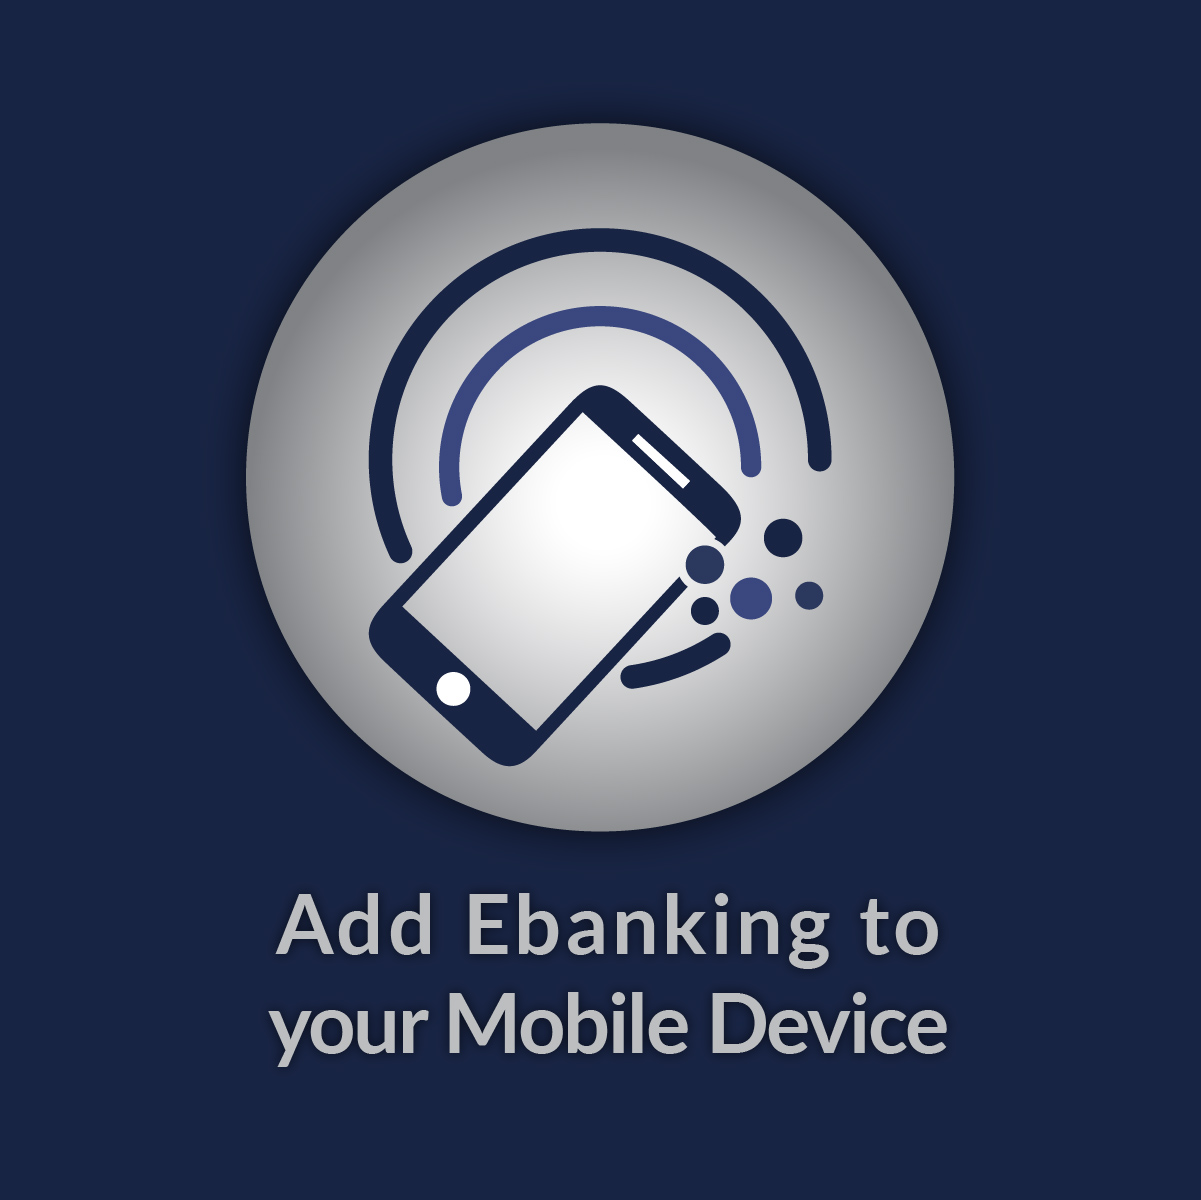 Ebanking To your Mobile Device